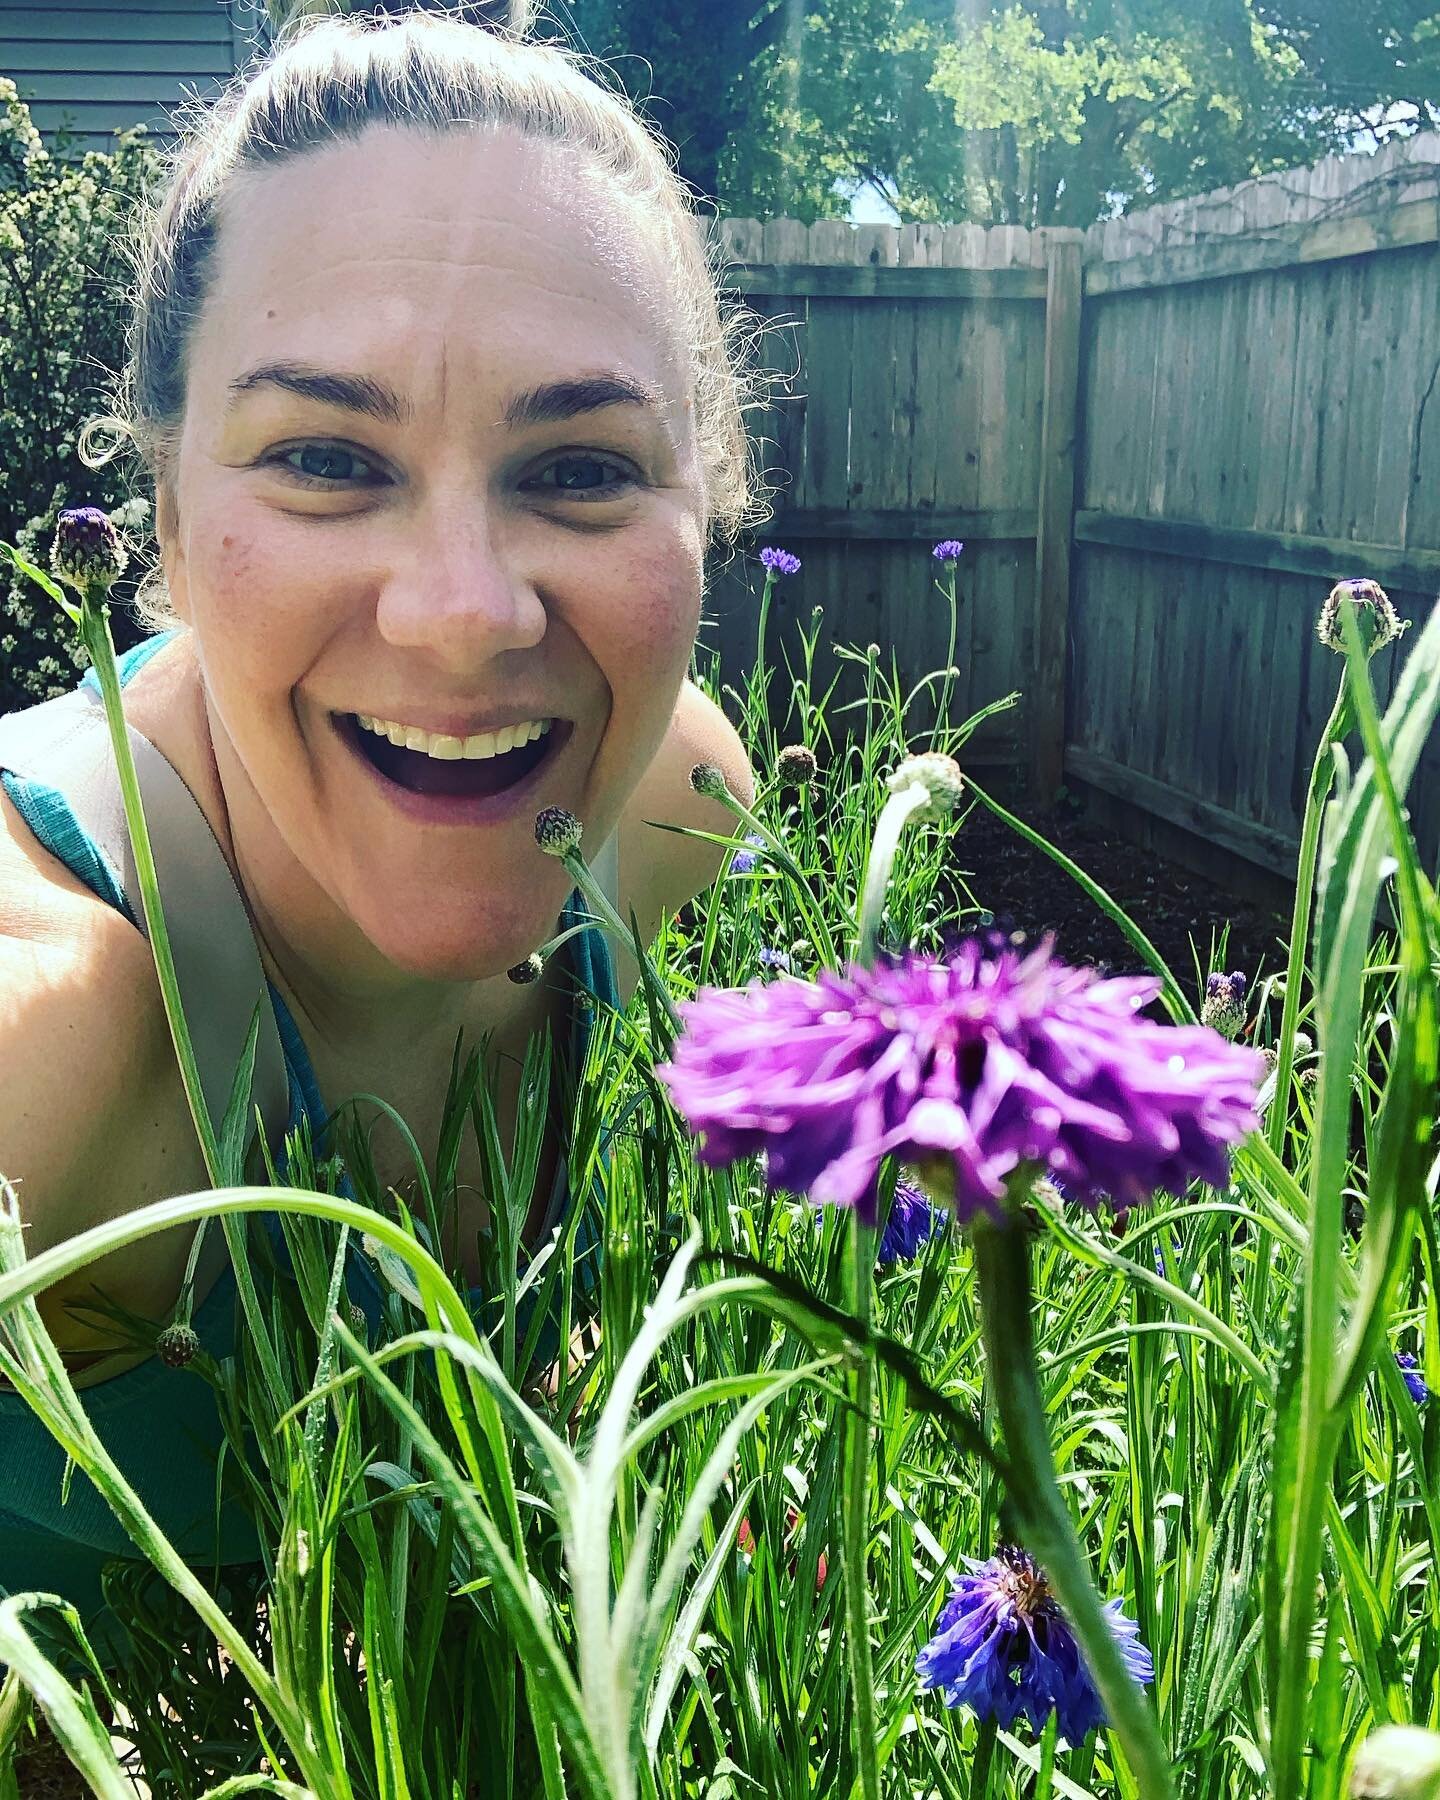 &hellip;..oh baby she&rsquo;s a wildflower, yes she is. Growing in places that you never did&hellip;.
🌸🌼🌻🪷🌺🌸🌹

#growbabygrow #wildflowers #wildheart #personalgrowth #thismoment #healingjourney #focused #heartcentered #soulwork #letitgo #nature